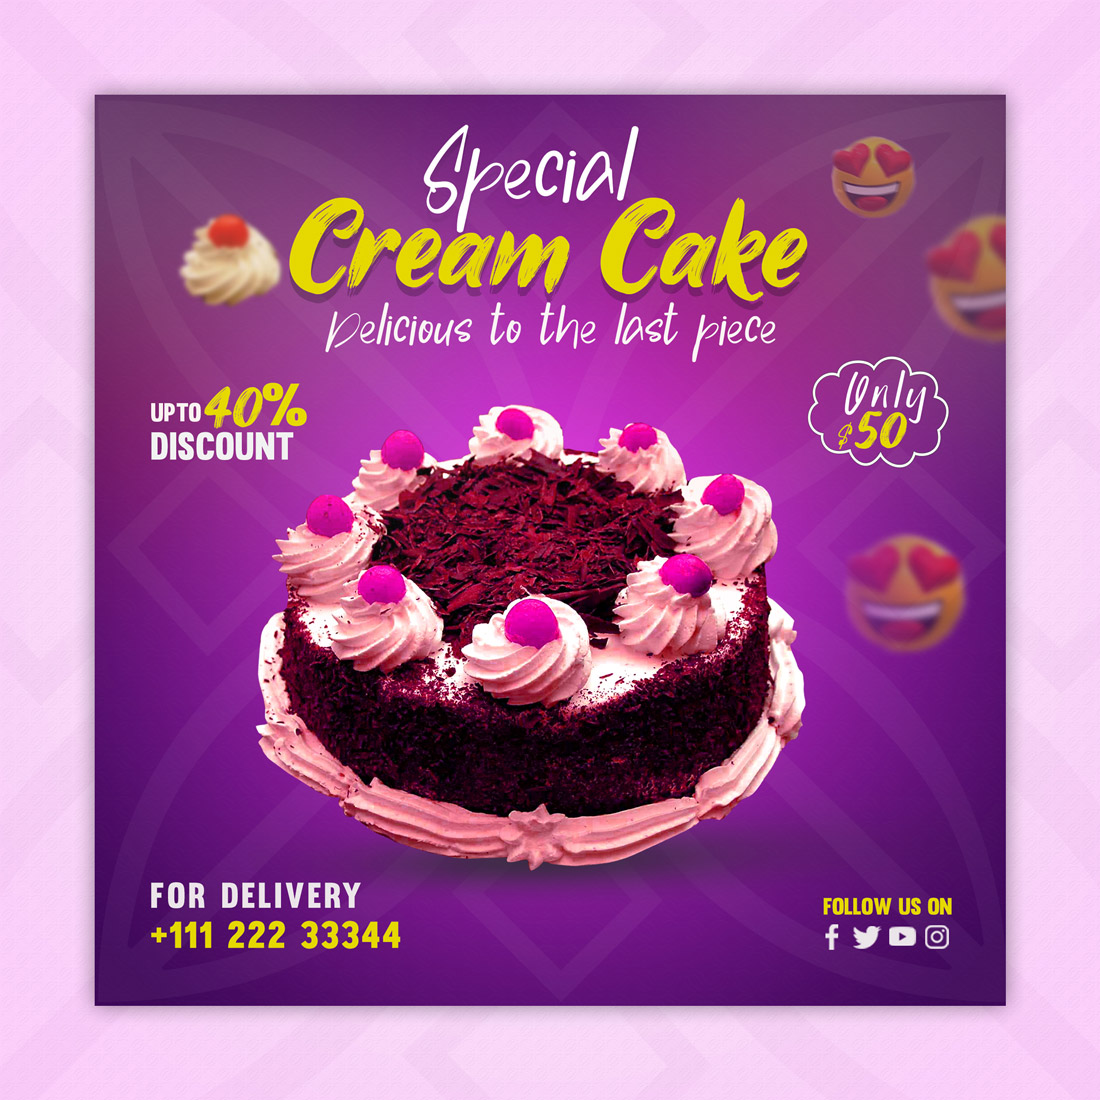 Retro Homemade Cake Poster Design Free Vector Download | FreeImages